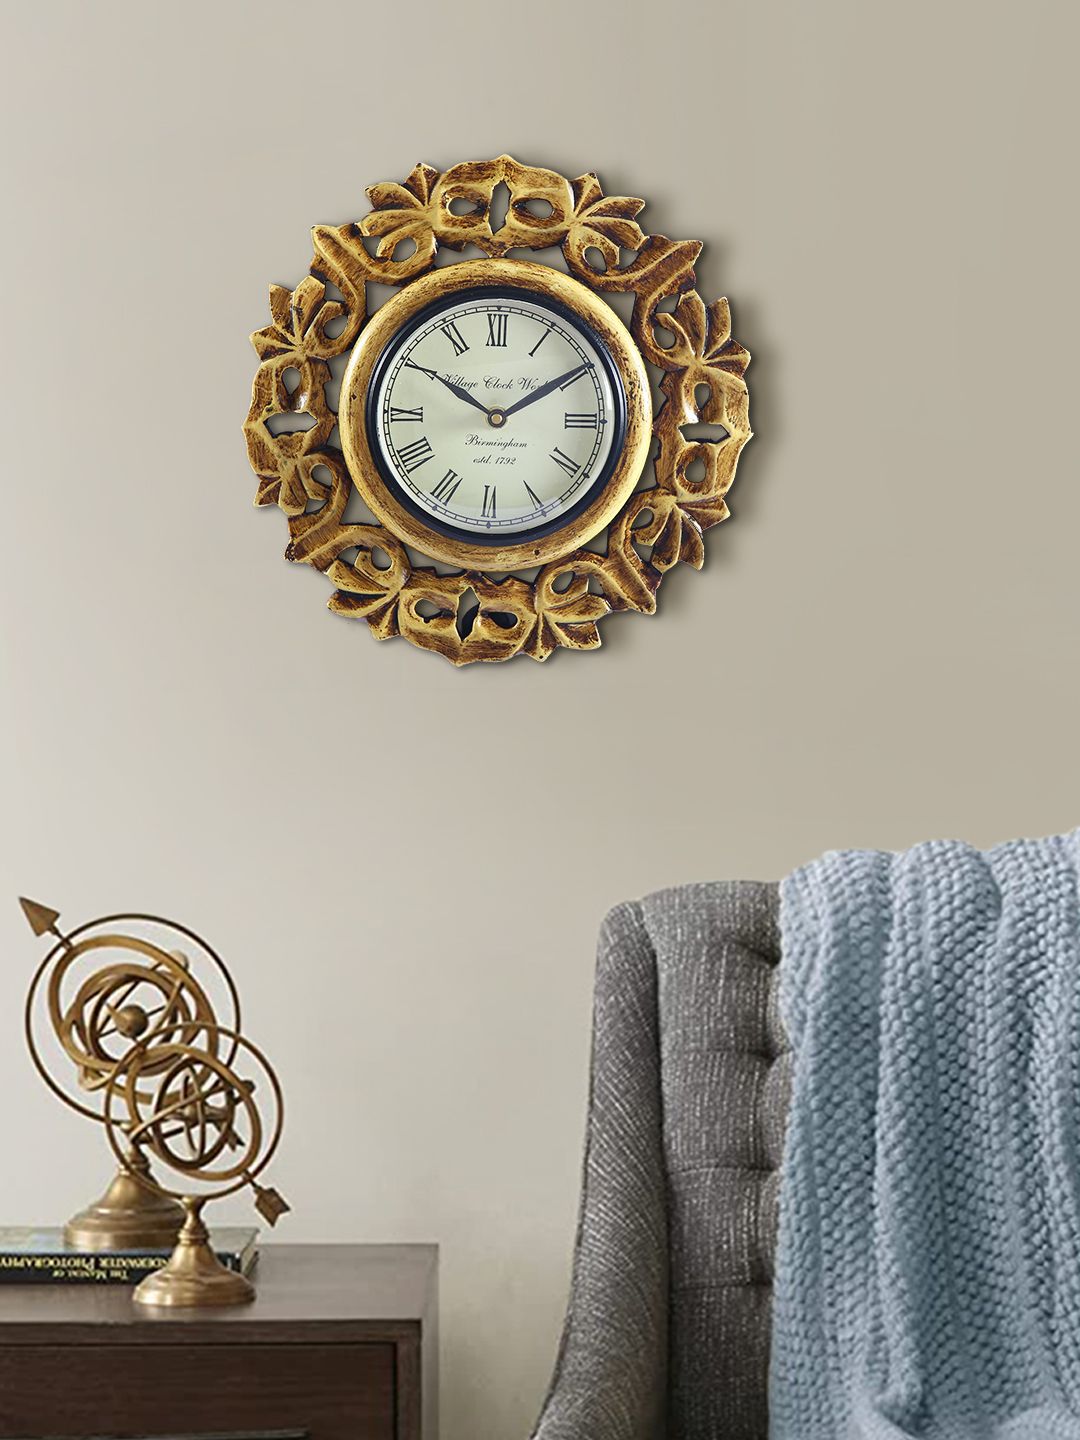 Aapno Rajasthan Gold-Toned & White Embellished Contemporary Wall Clock Price in India